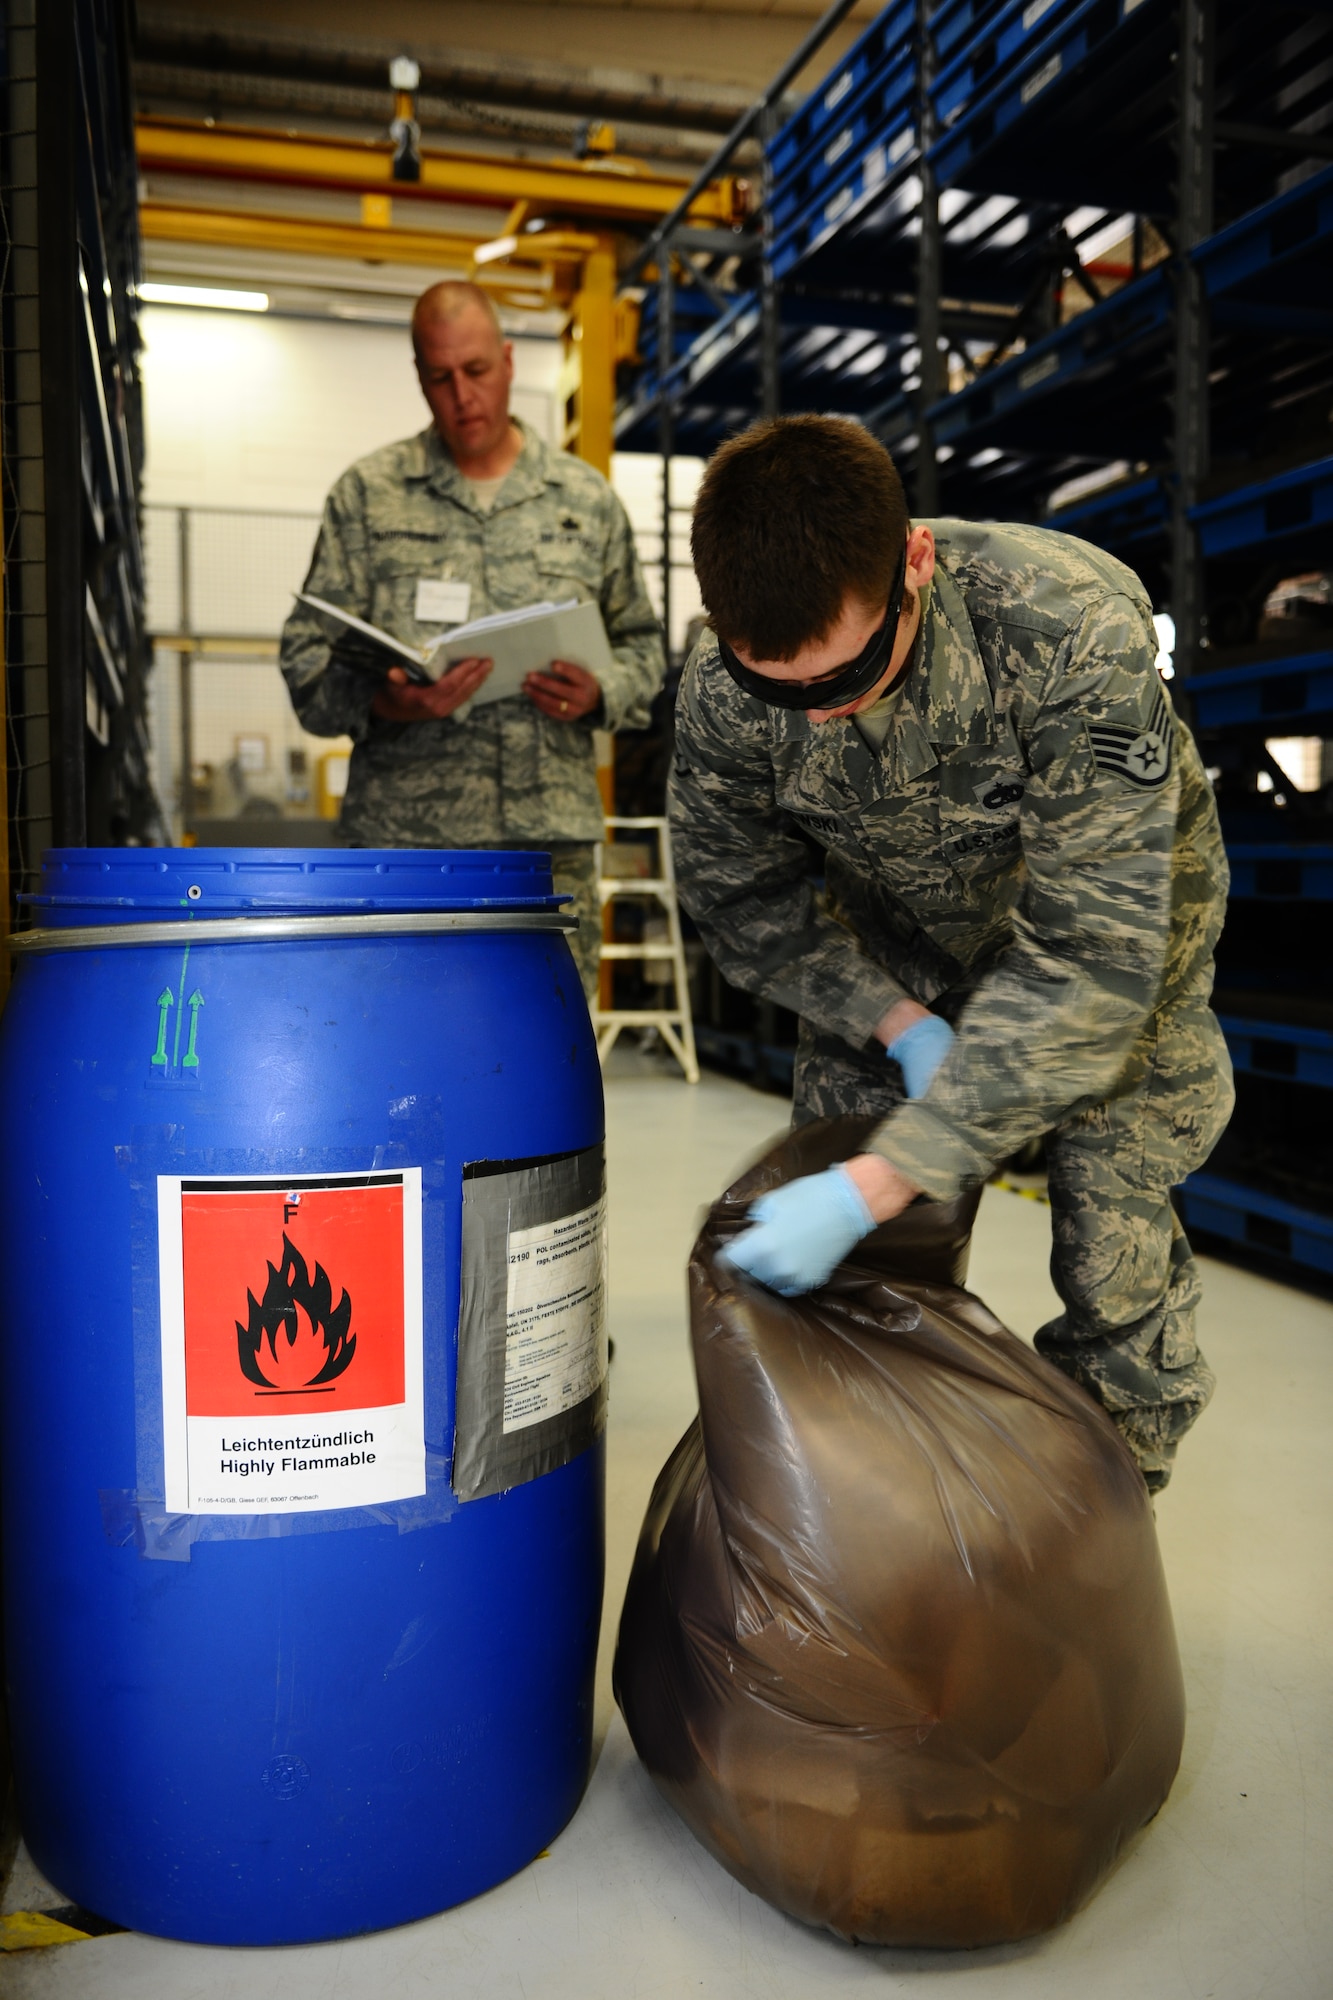 SPANGDAHLEM AIR BASE, Germany – Staff Sgt. Dustin Majewski, 52nd Component Maintenance Squadron propulsion support technician, empties a hazardous waste container while Master Sgt. Chad Haughenbury, U.S. Air Forces in Europe hazardous materials manager, inspects the work center during an Environmental, Safety and Occupational Health Compliance Assessment Management Program evaluation inside the jet propulsion maintenance shop here April 18. The week-long ESOHCAMP assessment gives the base an idea of how its compares to U. S. Air Force and host-nation regulations regarding environmental and occupational safety. This team is made up of 15 USAFE evaluators who assess Spangdahlem AB’s overall health. The base uses the results from the program to help become USAFE’s most environmentally friendly wing. (U.S. Air Force photo by Airman 1st Class Dillon Davis/Released)